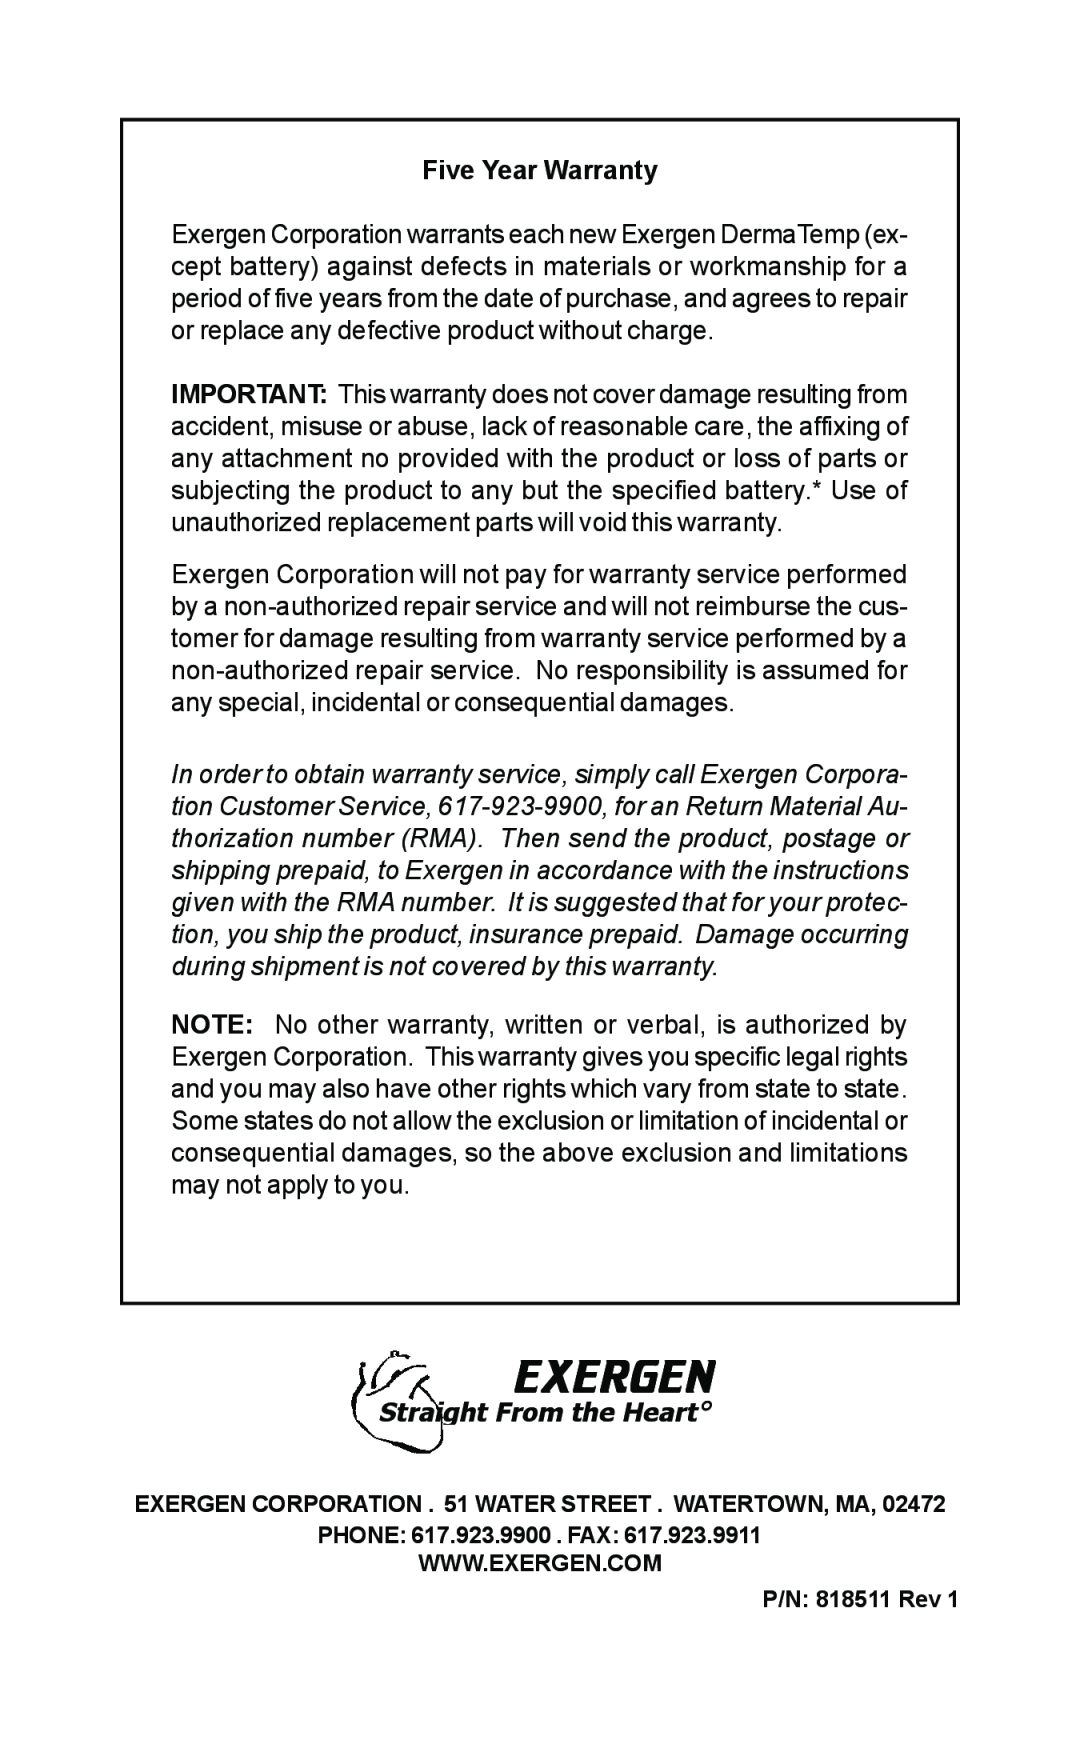 Exergen DT 1001-LN, DT 1001-RS, DT 1001-LT manual Five Year Warranty, Exergen, Straight From the Heart 